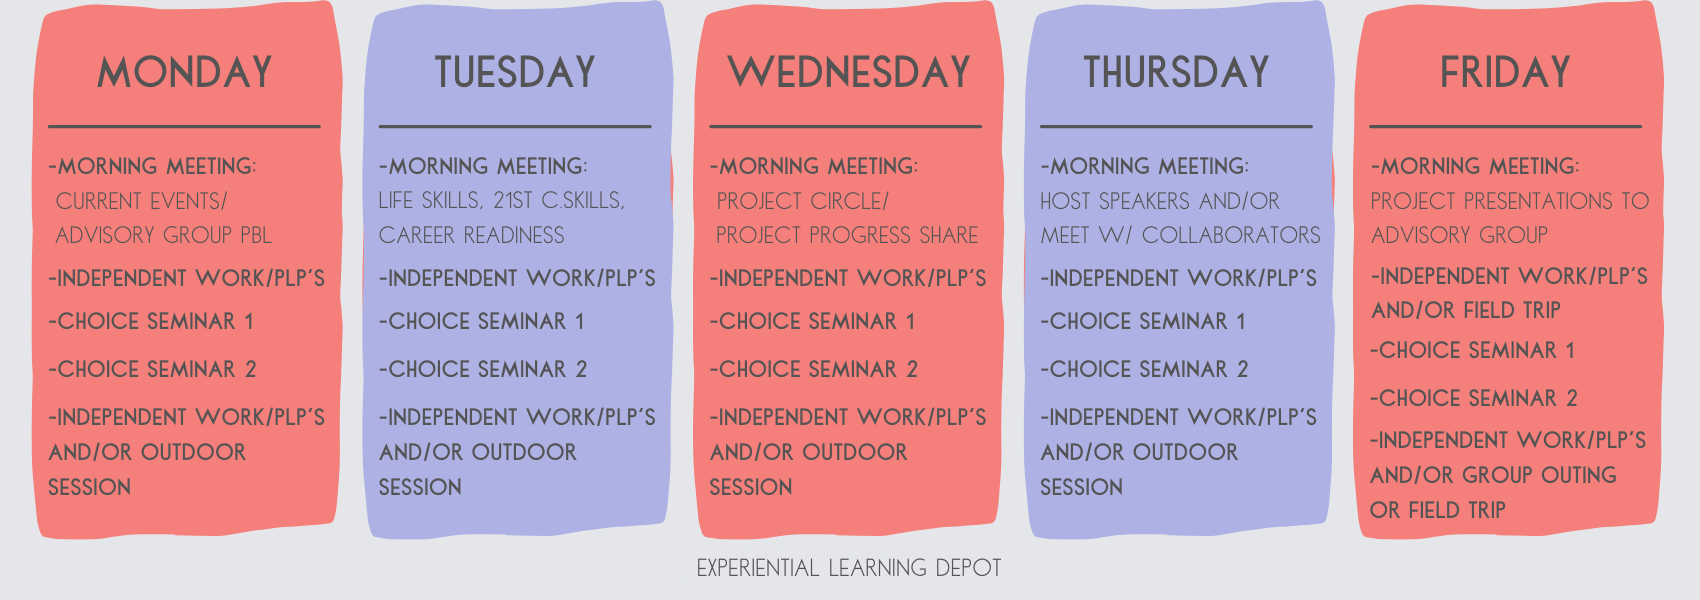 Experiential learning school schedule example. How to use experiential learning throughout the week.